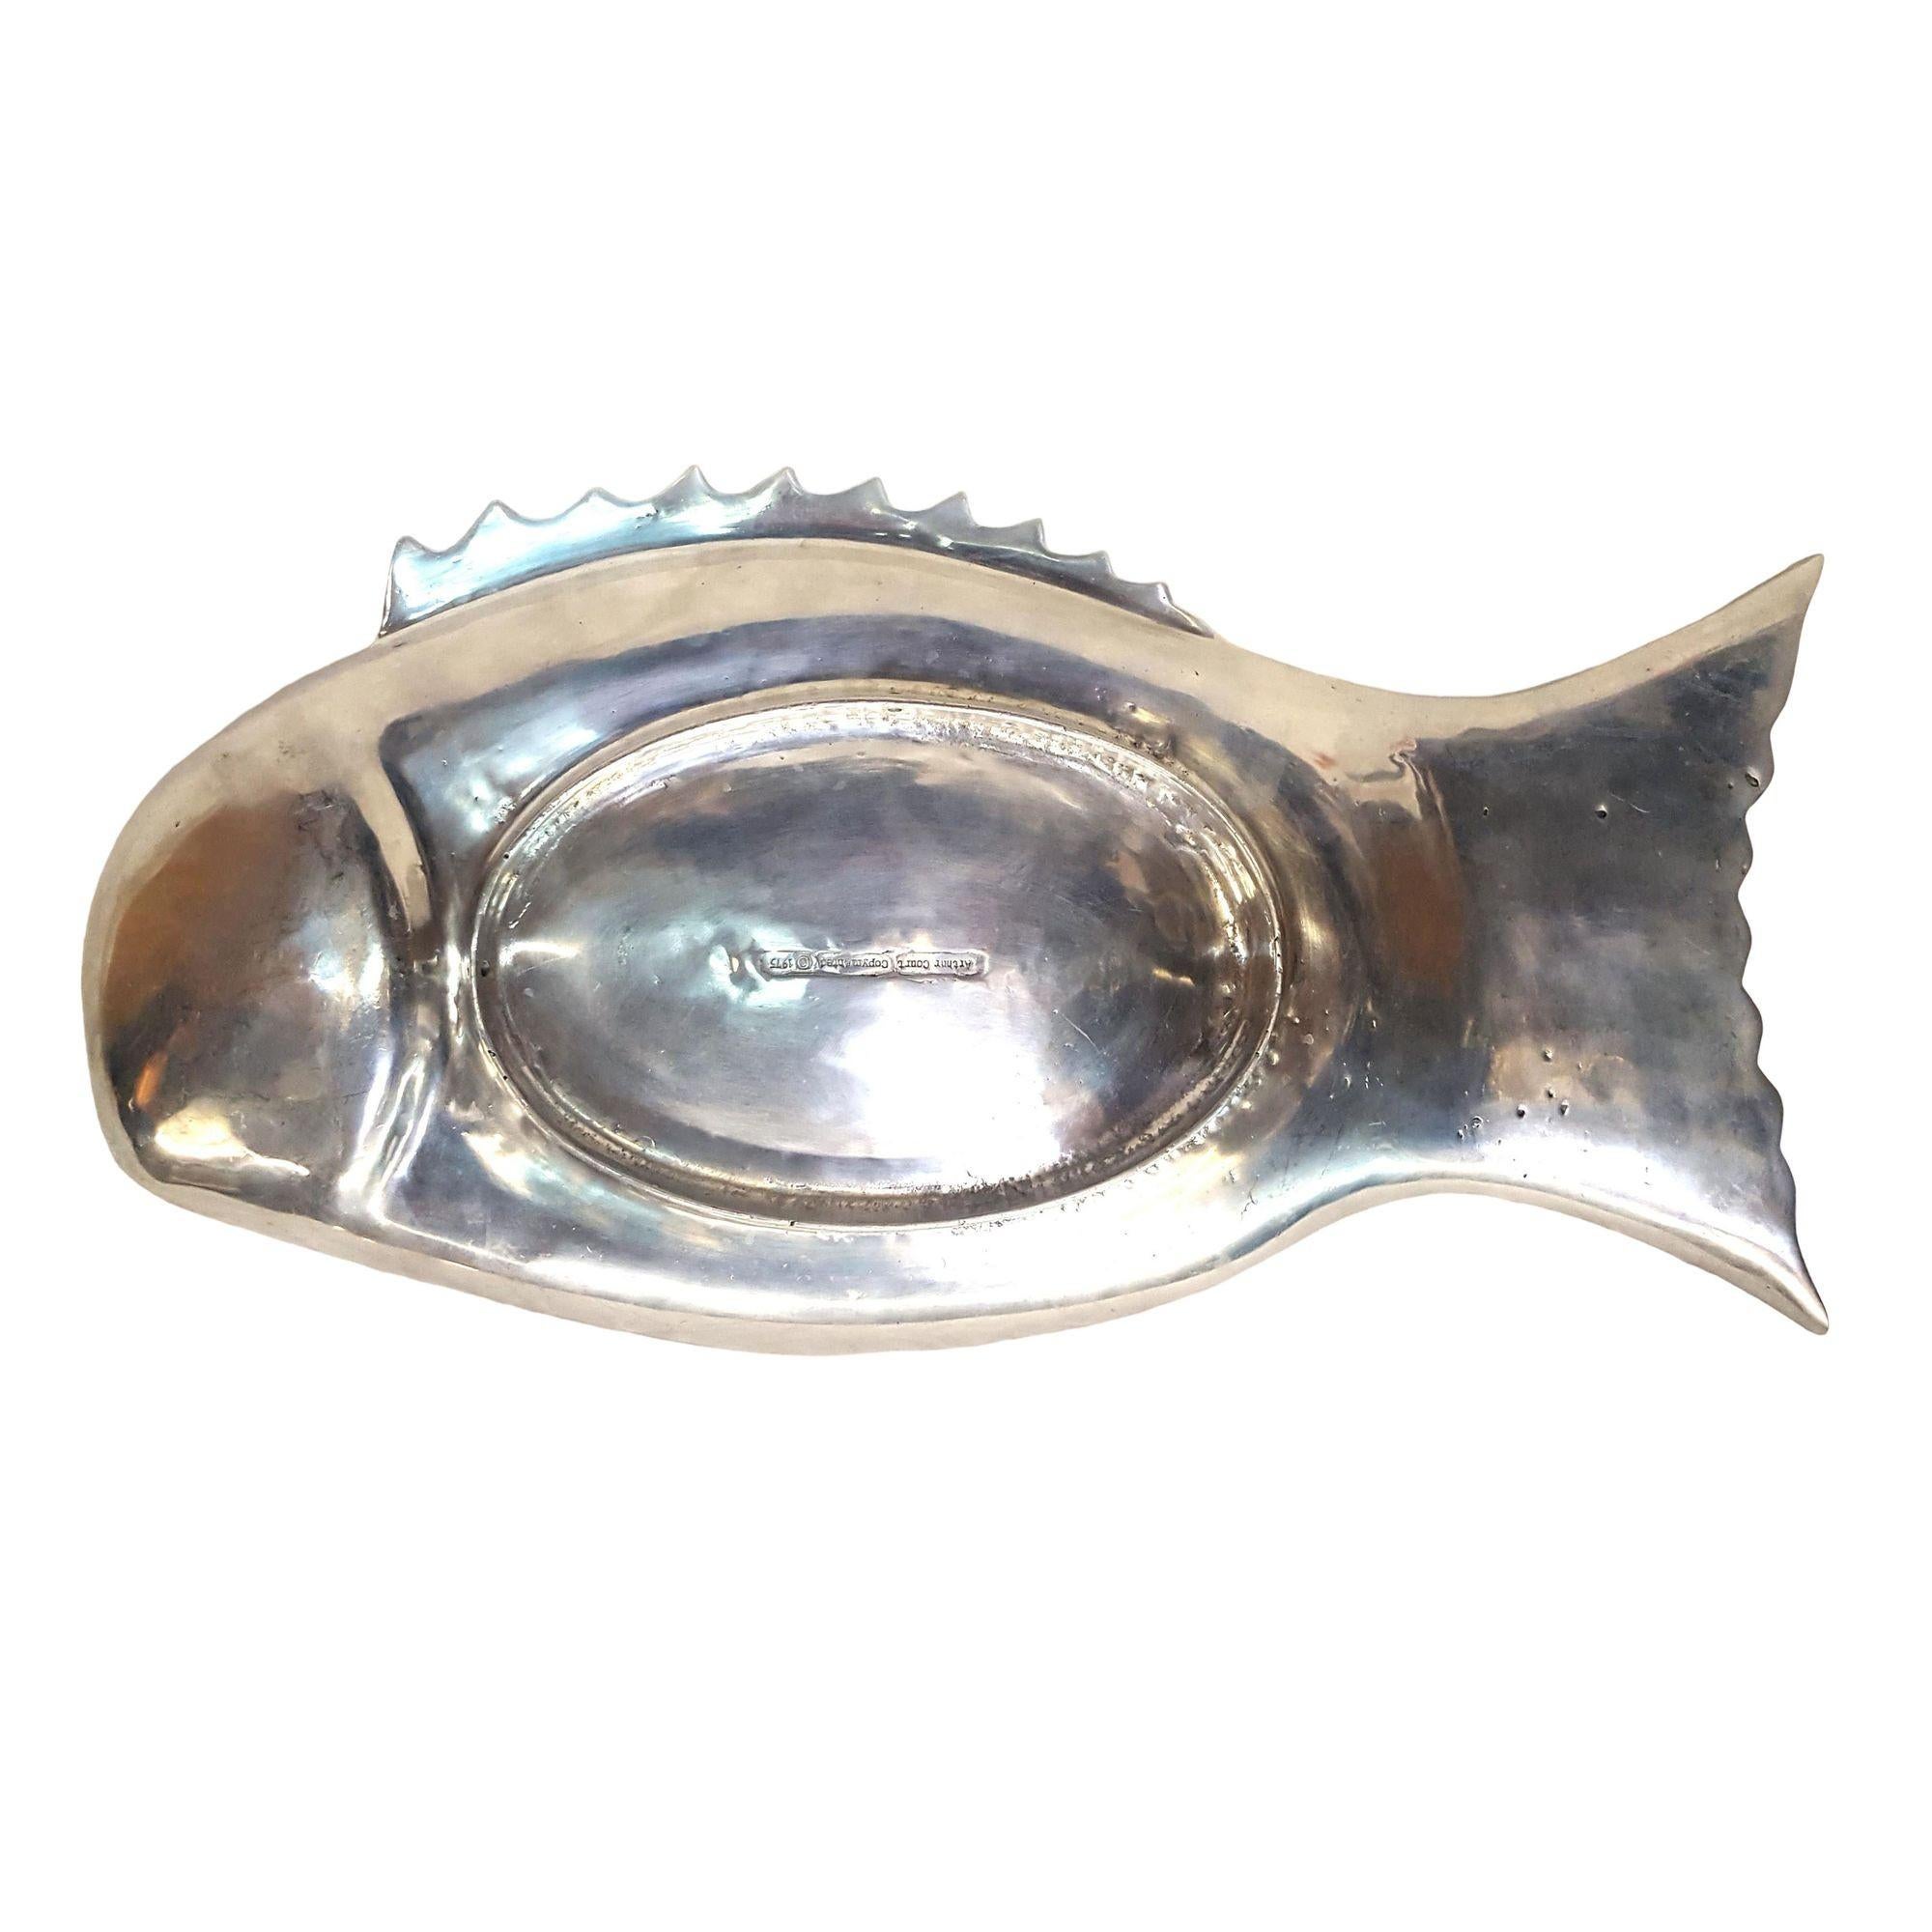 Vintage Arthur Court Aluminum Fish Serving Platter

Year manufactured: 1975
Dimensions: 24 inches long X 13 inches wide X 2-1/2 inches tall

Info: Gorgeous aluminum fish serving platter designed by Arthur Court in 1975. The piece has intricate